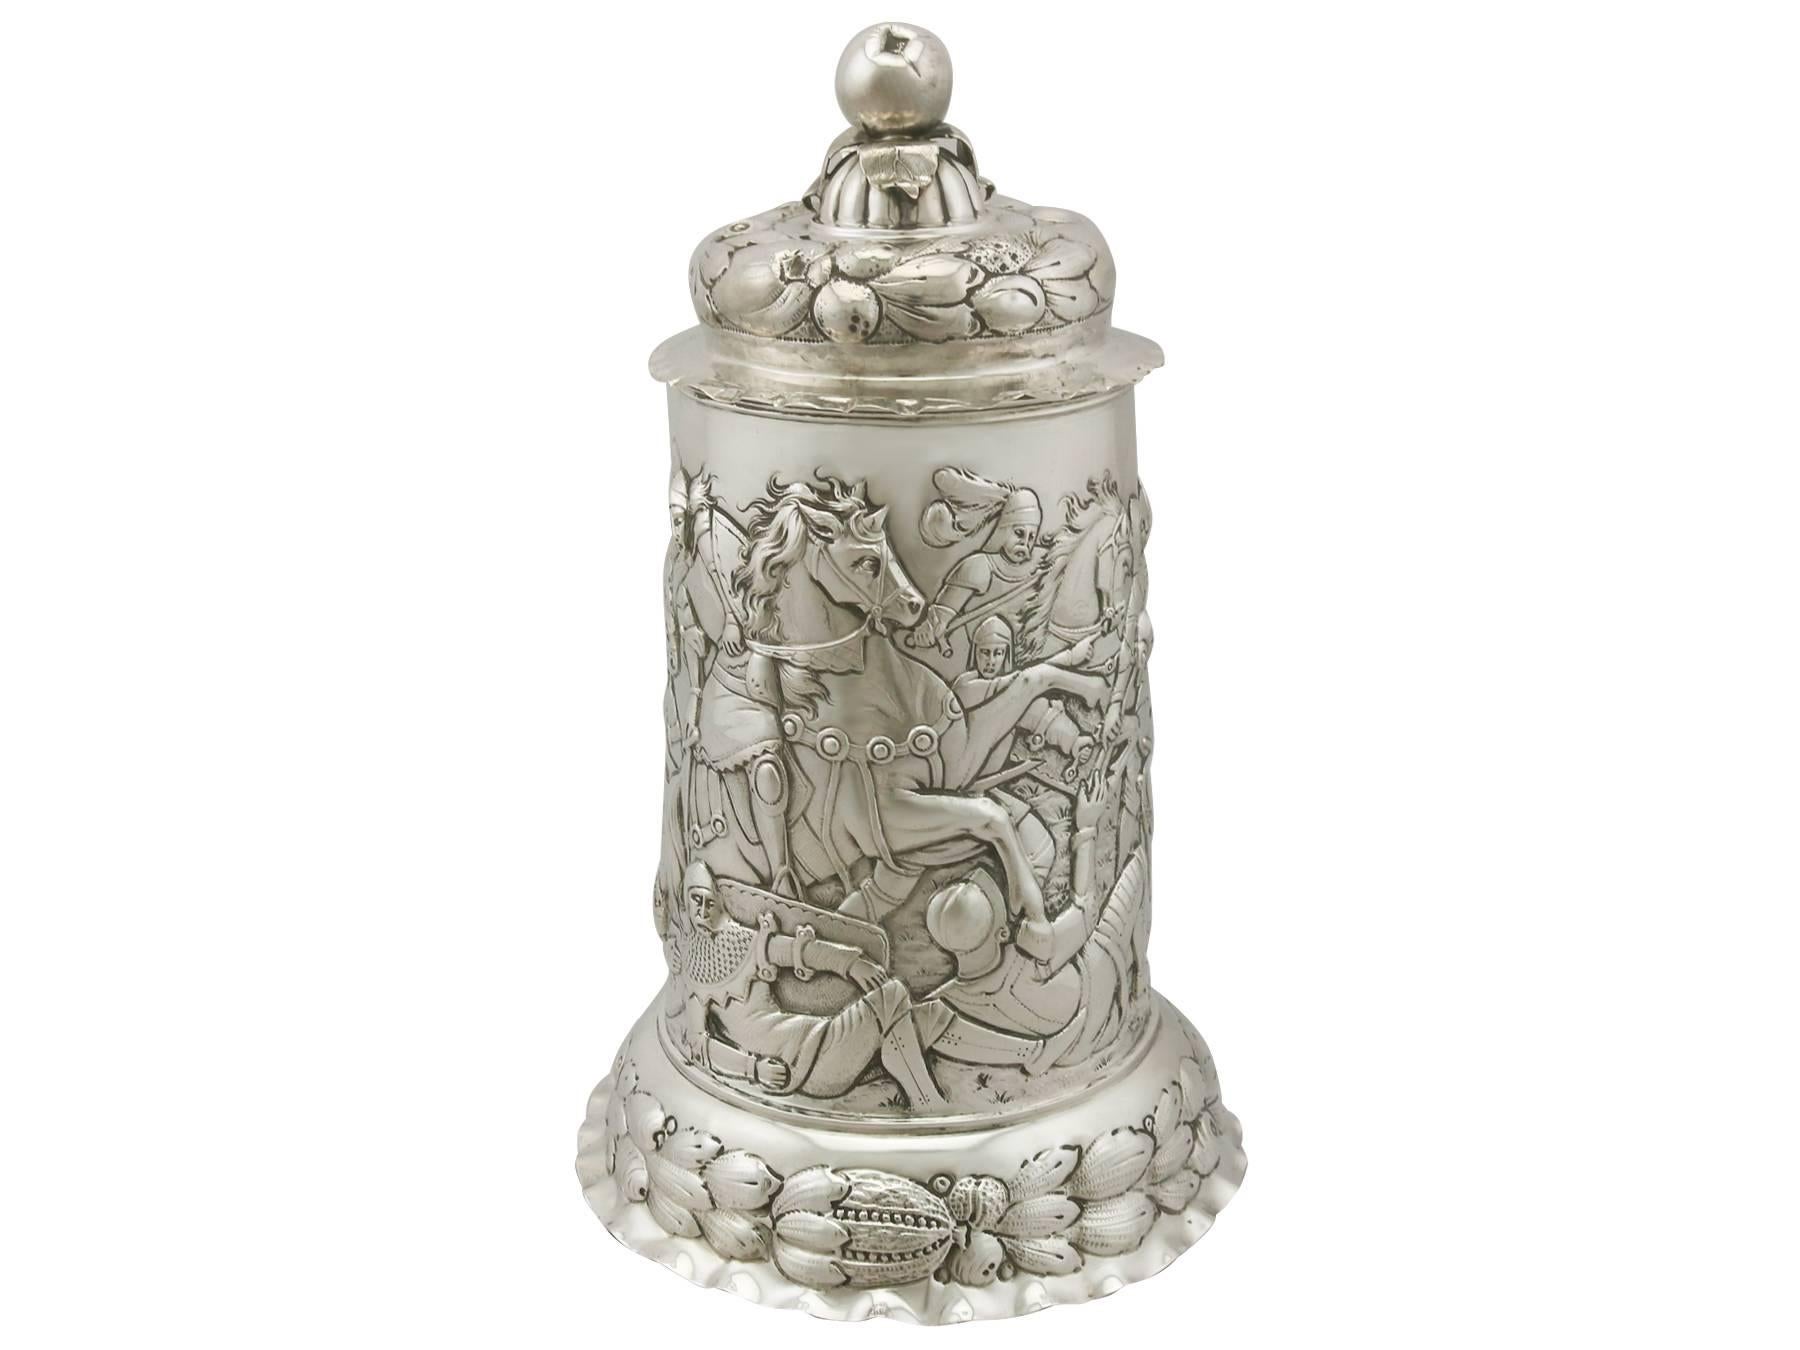 An exceptional, fine and impressive antique German silver quart tankard; an addition to our range of collectable silverware

This exceptional antique German silver tankard has a plain tapering cylindrical form onto a circular shaped domed